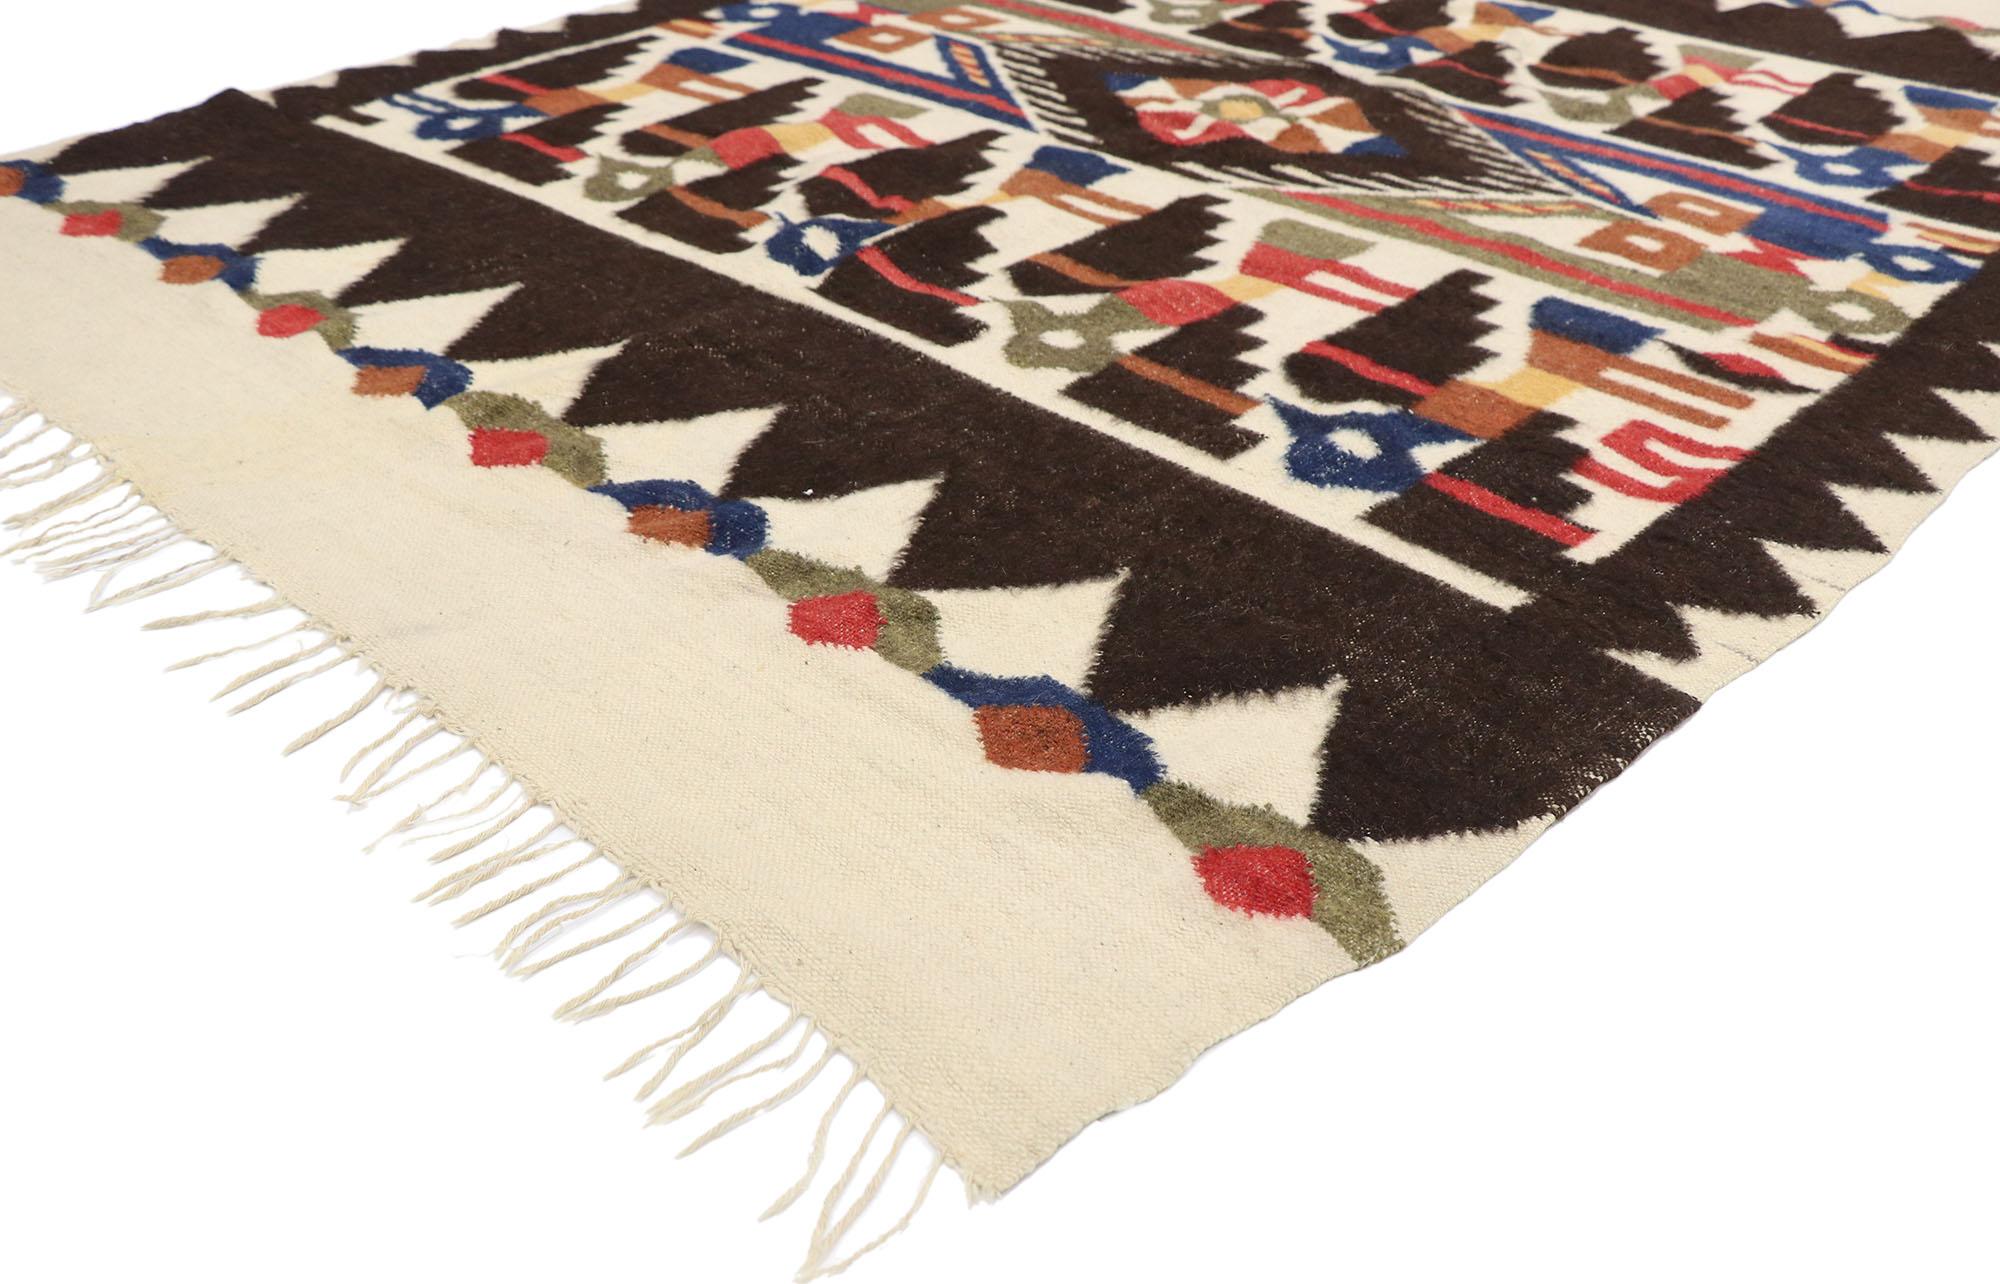 78077 vintage South American Kilim rug with Tribal style 05'04 x 07'06. Emulating Chancay pre-Incan culture, this hand-woven wool vintage South American kilim Peruvian rug is a captivating vision of woven beauty. The striking Pájaro design and